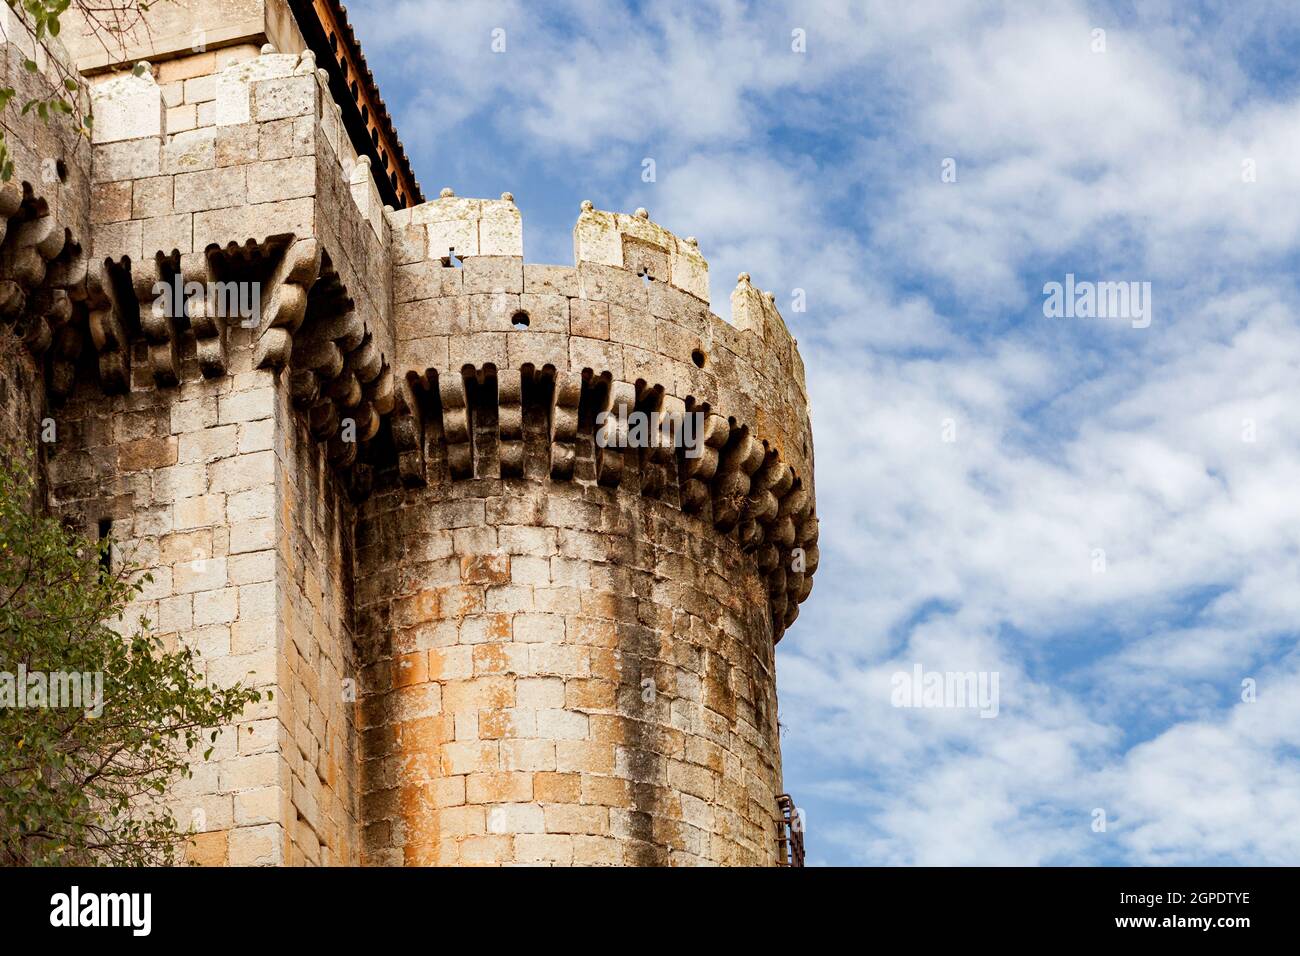 Tower of a castle located in the north of Spain Stock Photo